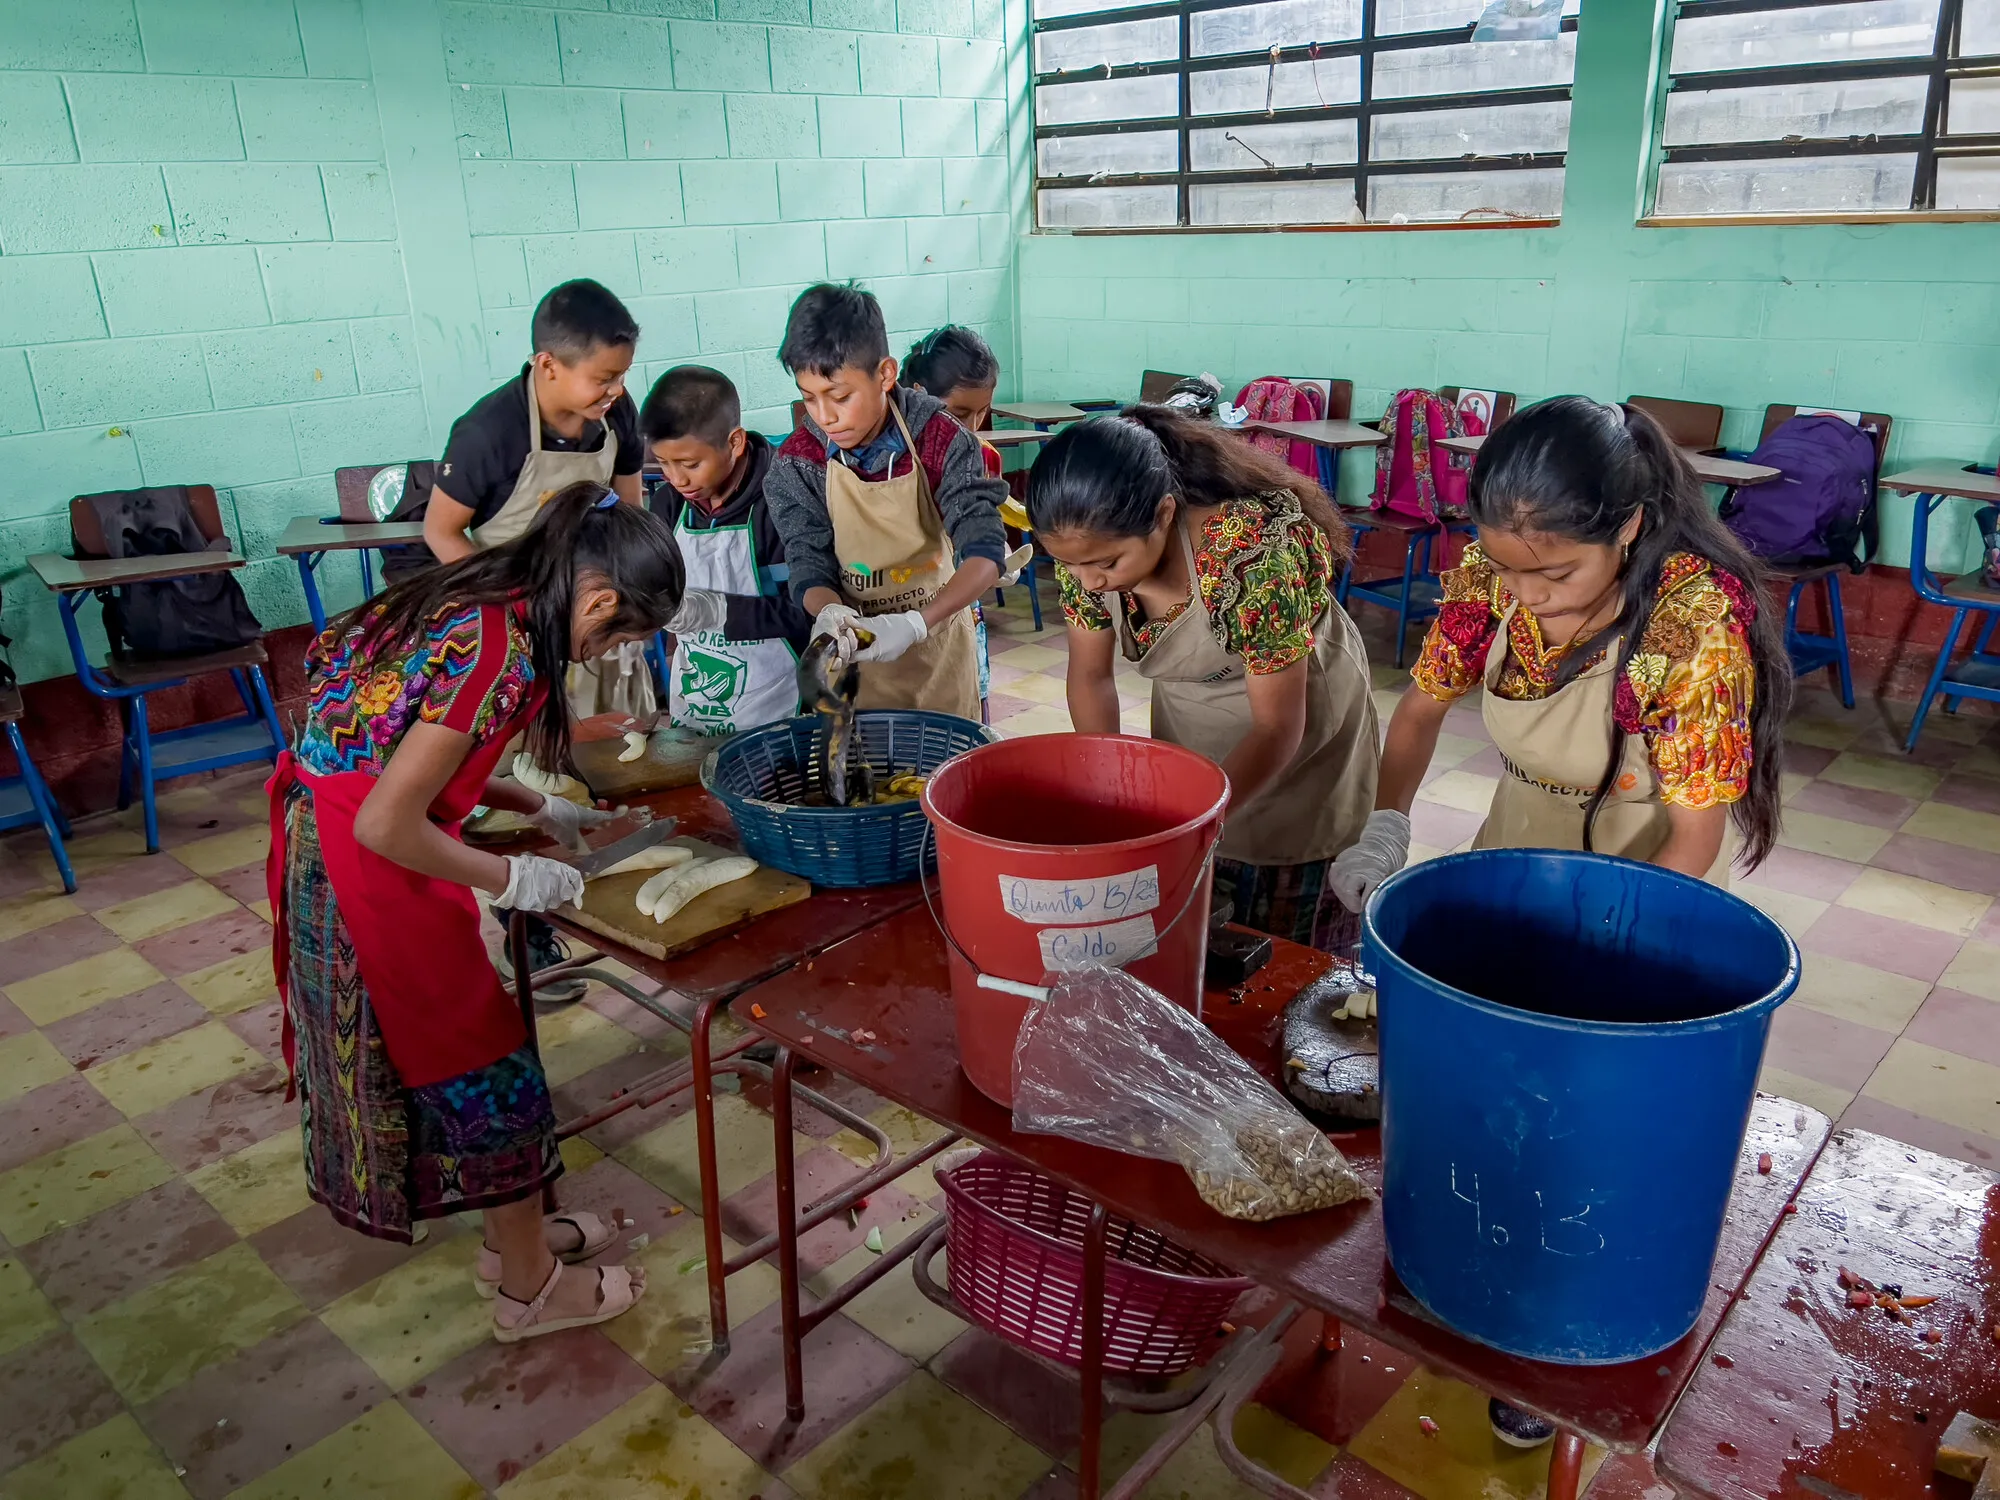 Group of students in a classroom, preparing food.